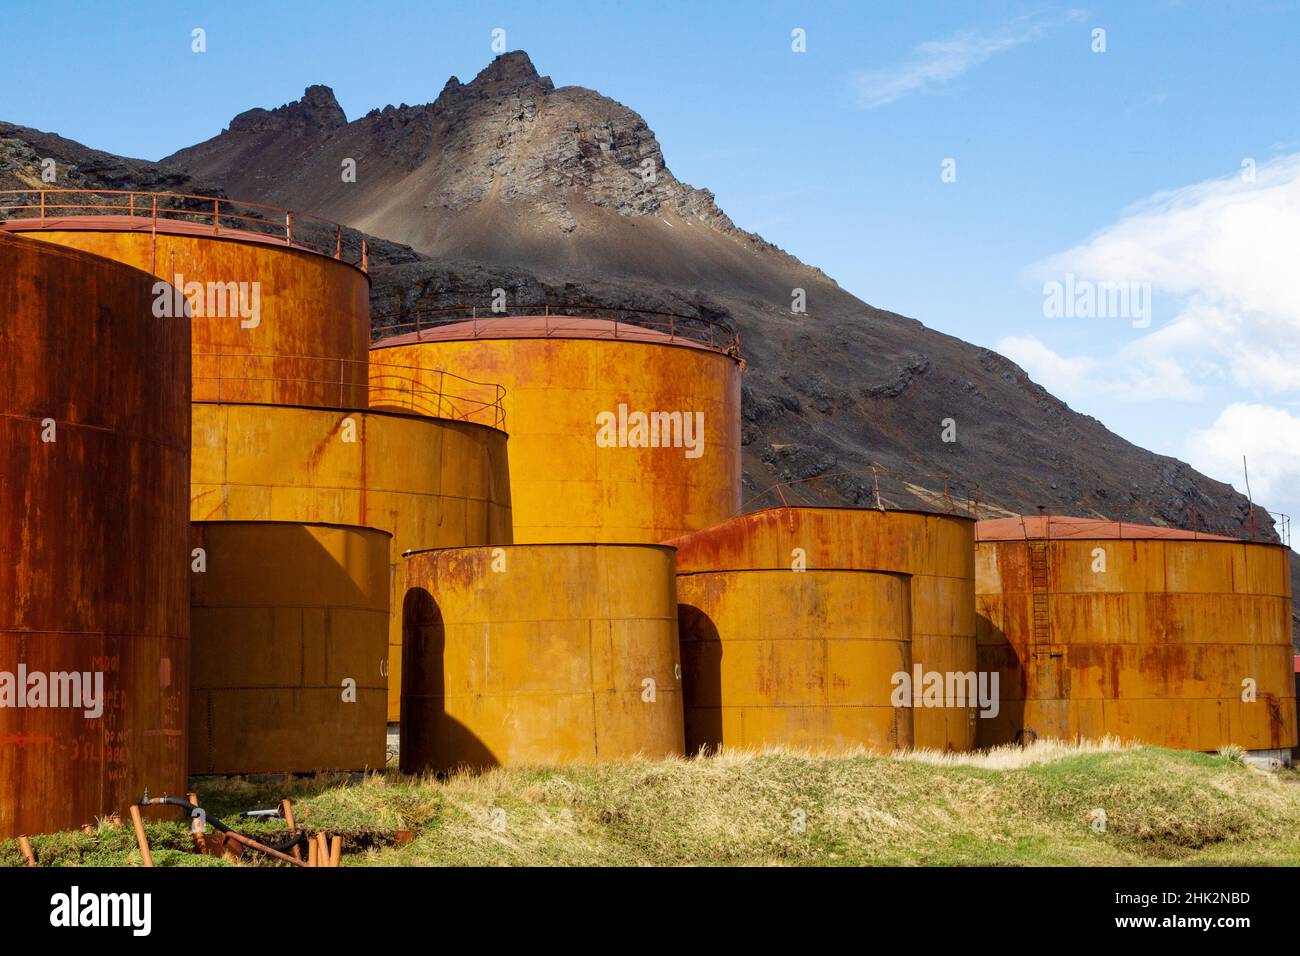 Southern Ocean, South Georgia, King Edward Cove, Grytviken, Grytviken whaling station. Abandoned tanks show the immensity of the whaling done here. Stock Photo